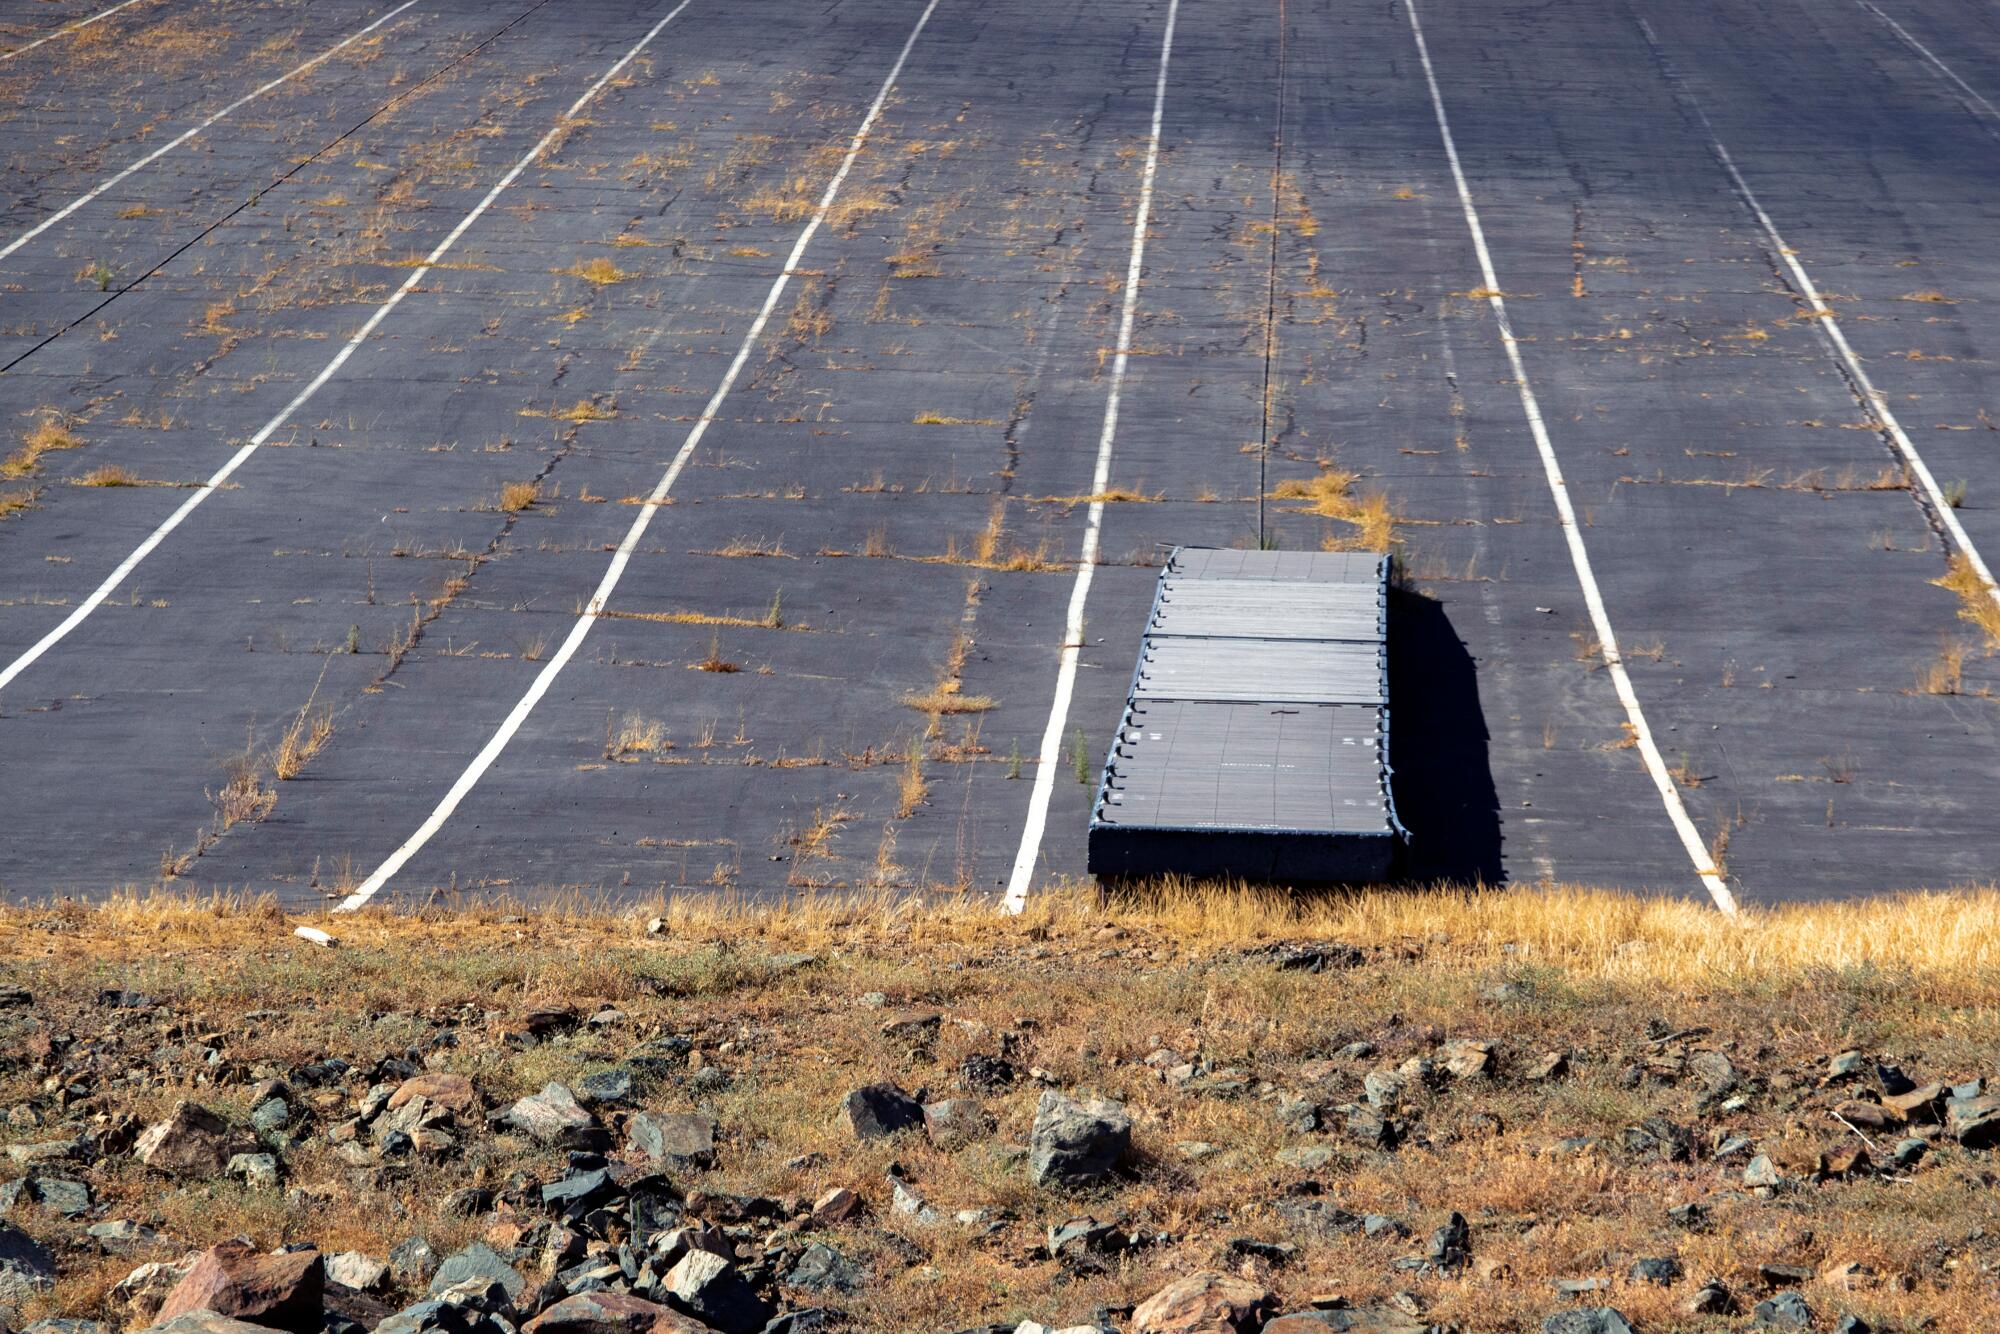 A boat dock is left high and dry on the shoreline at Lake Oroville.